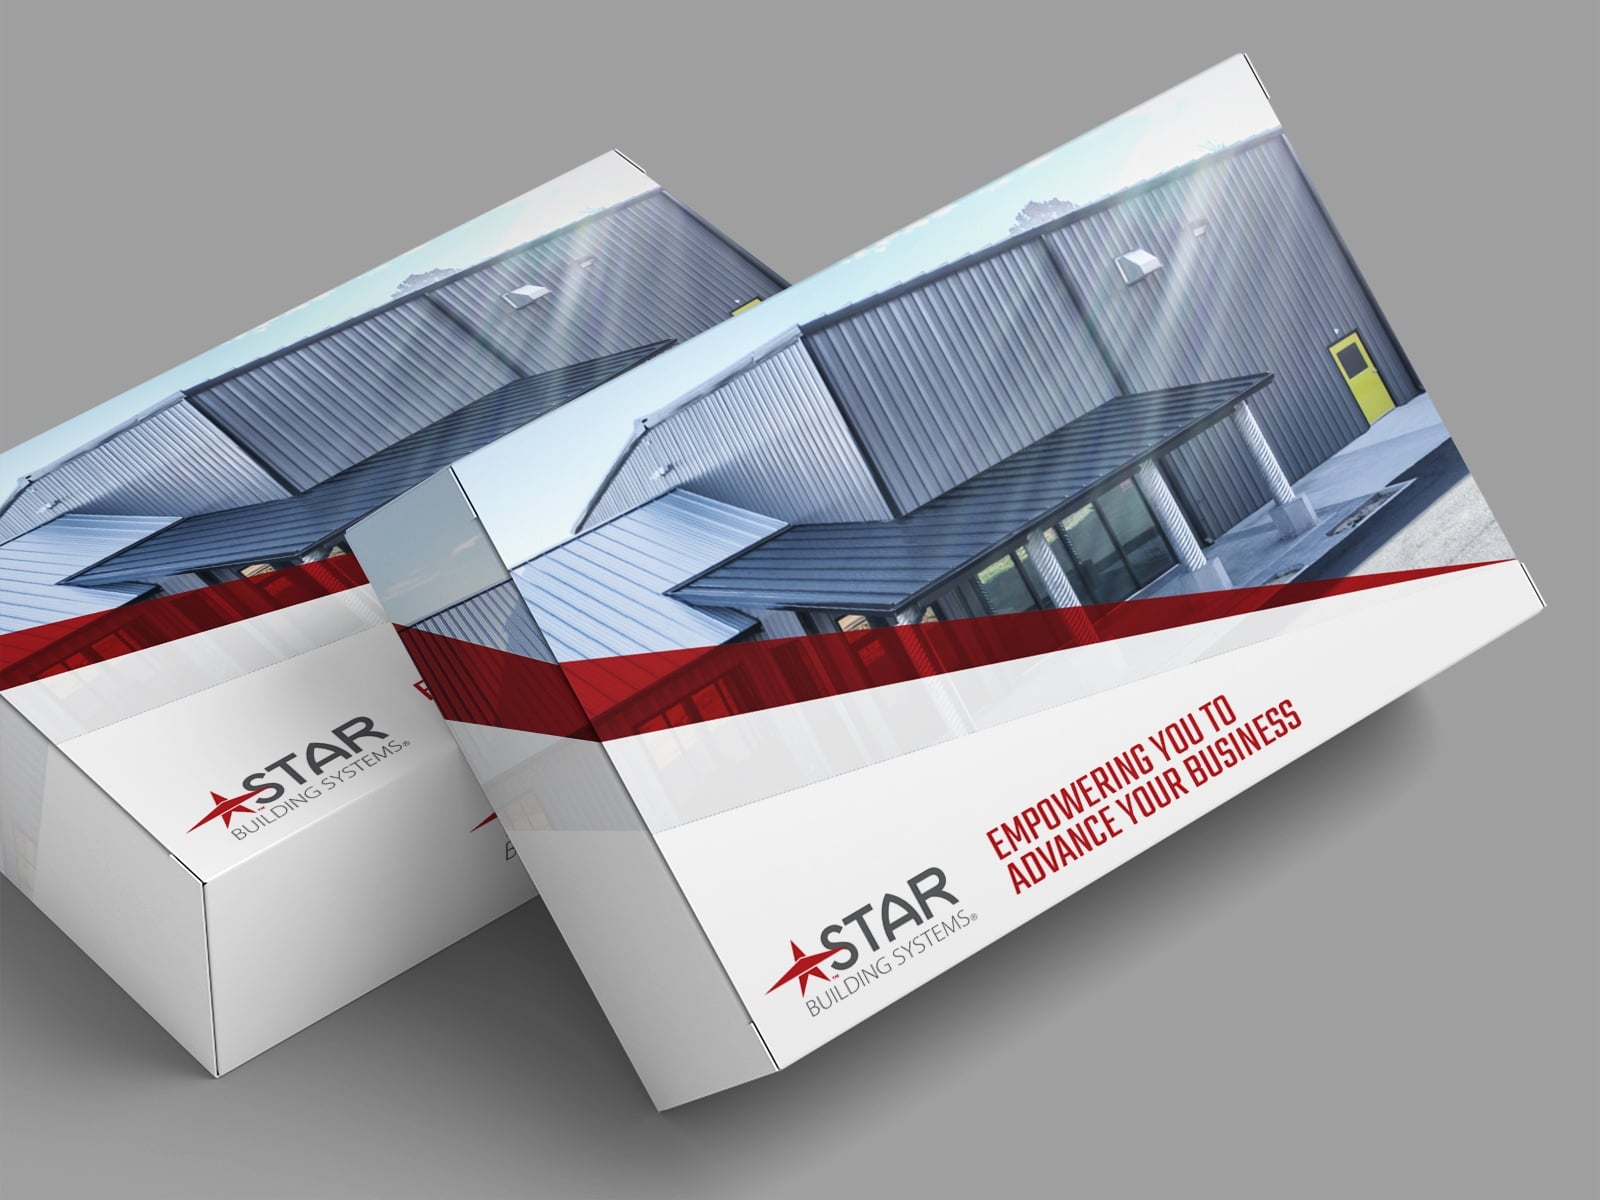 Star building systems brand kit